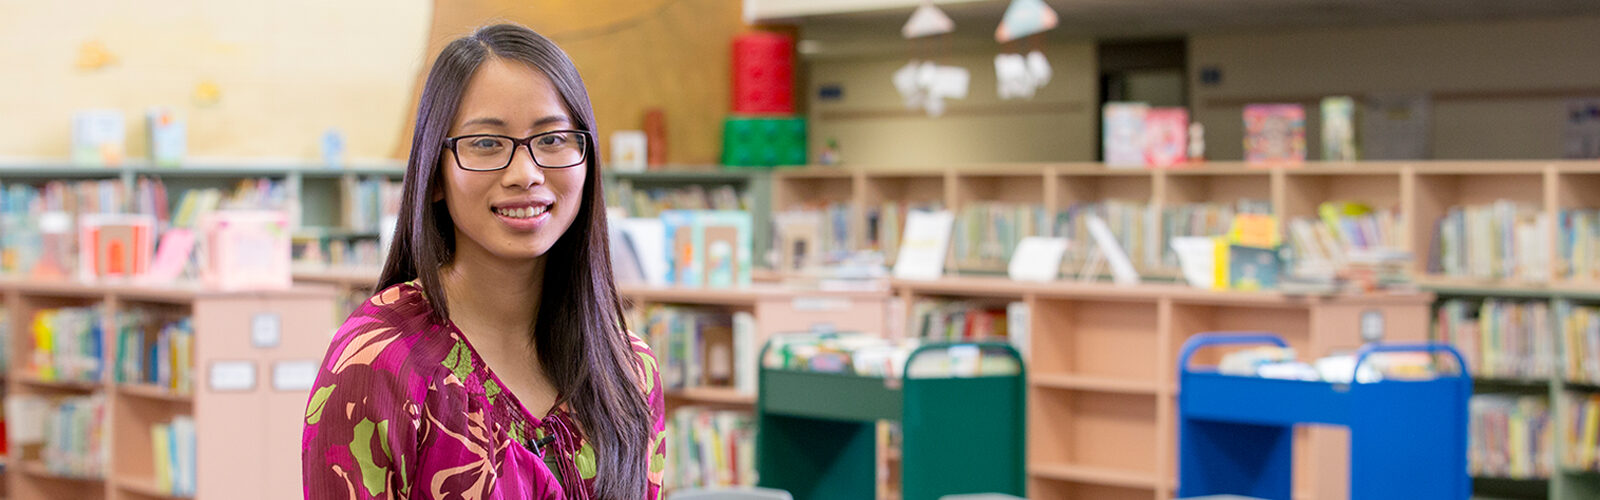 A student teacher poses in her school's library.